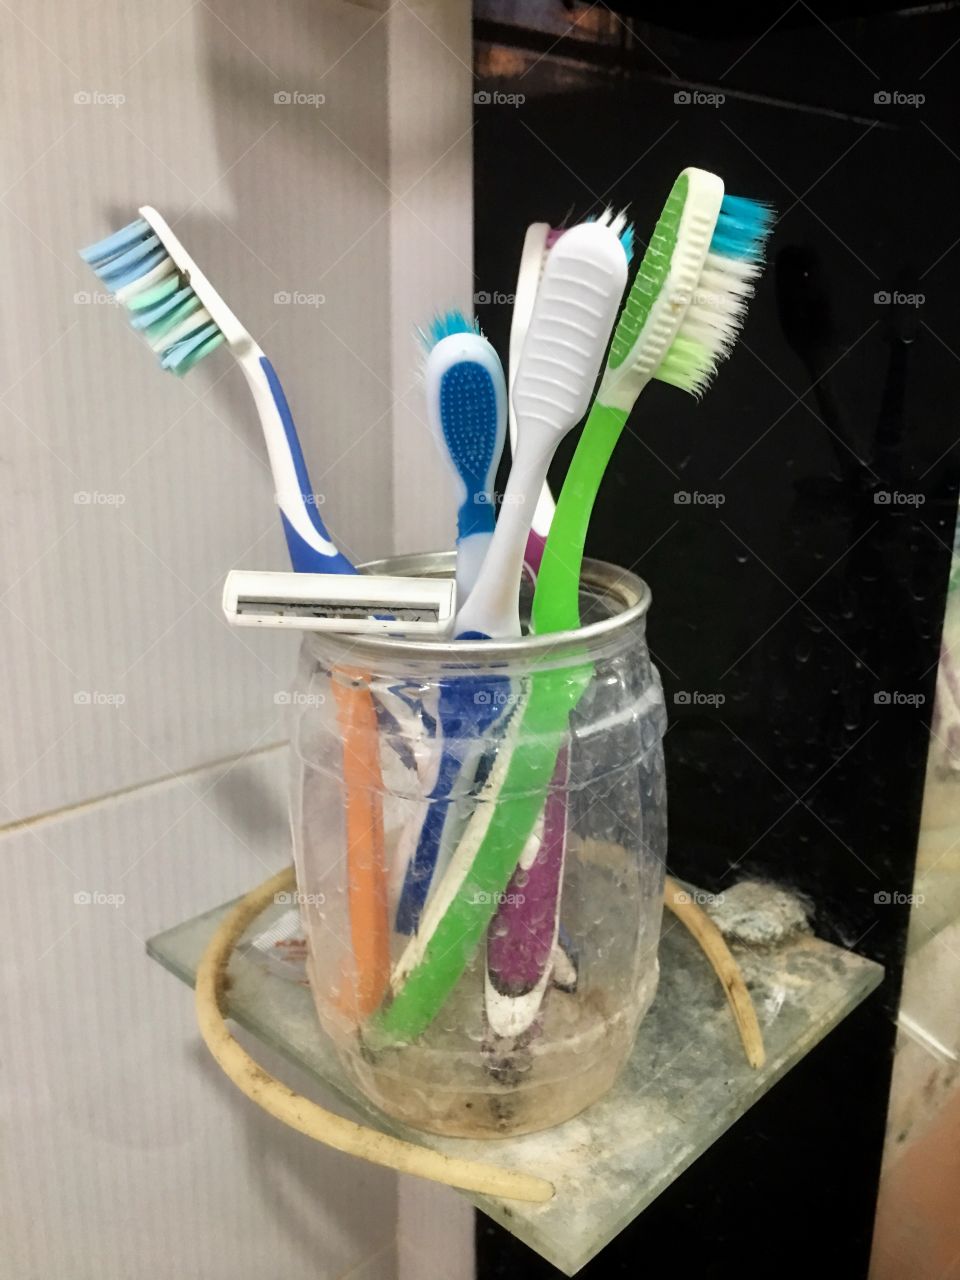 Toothbrush holder in the bathroom